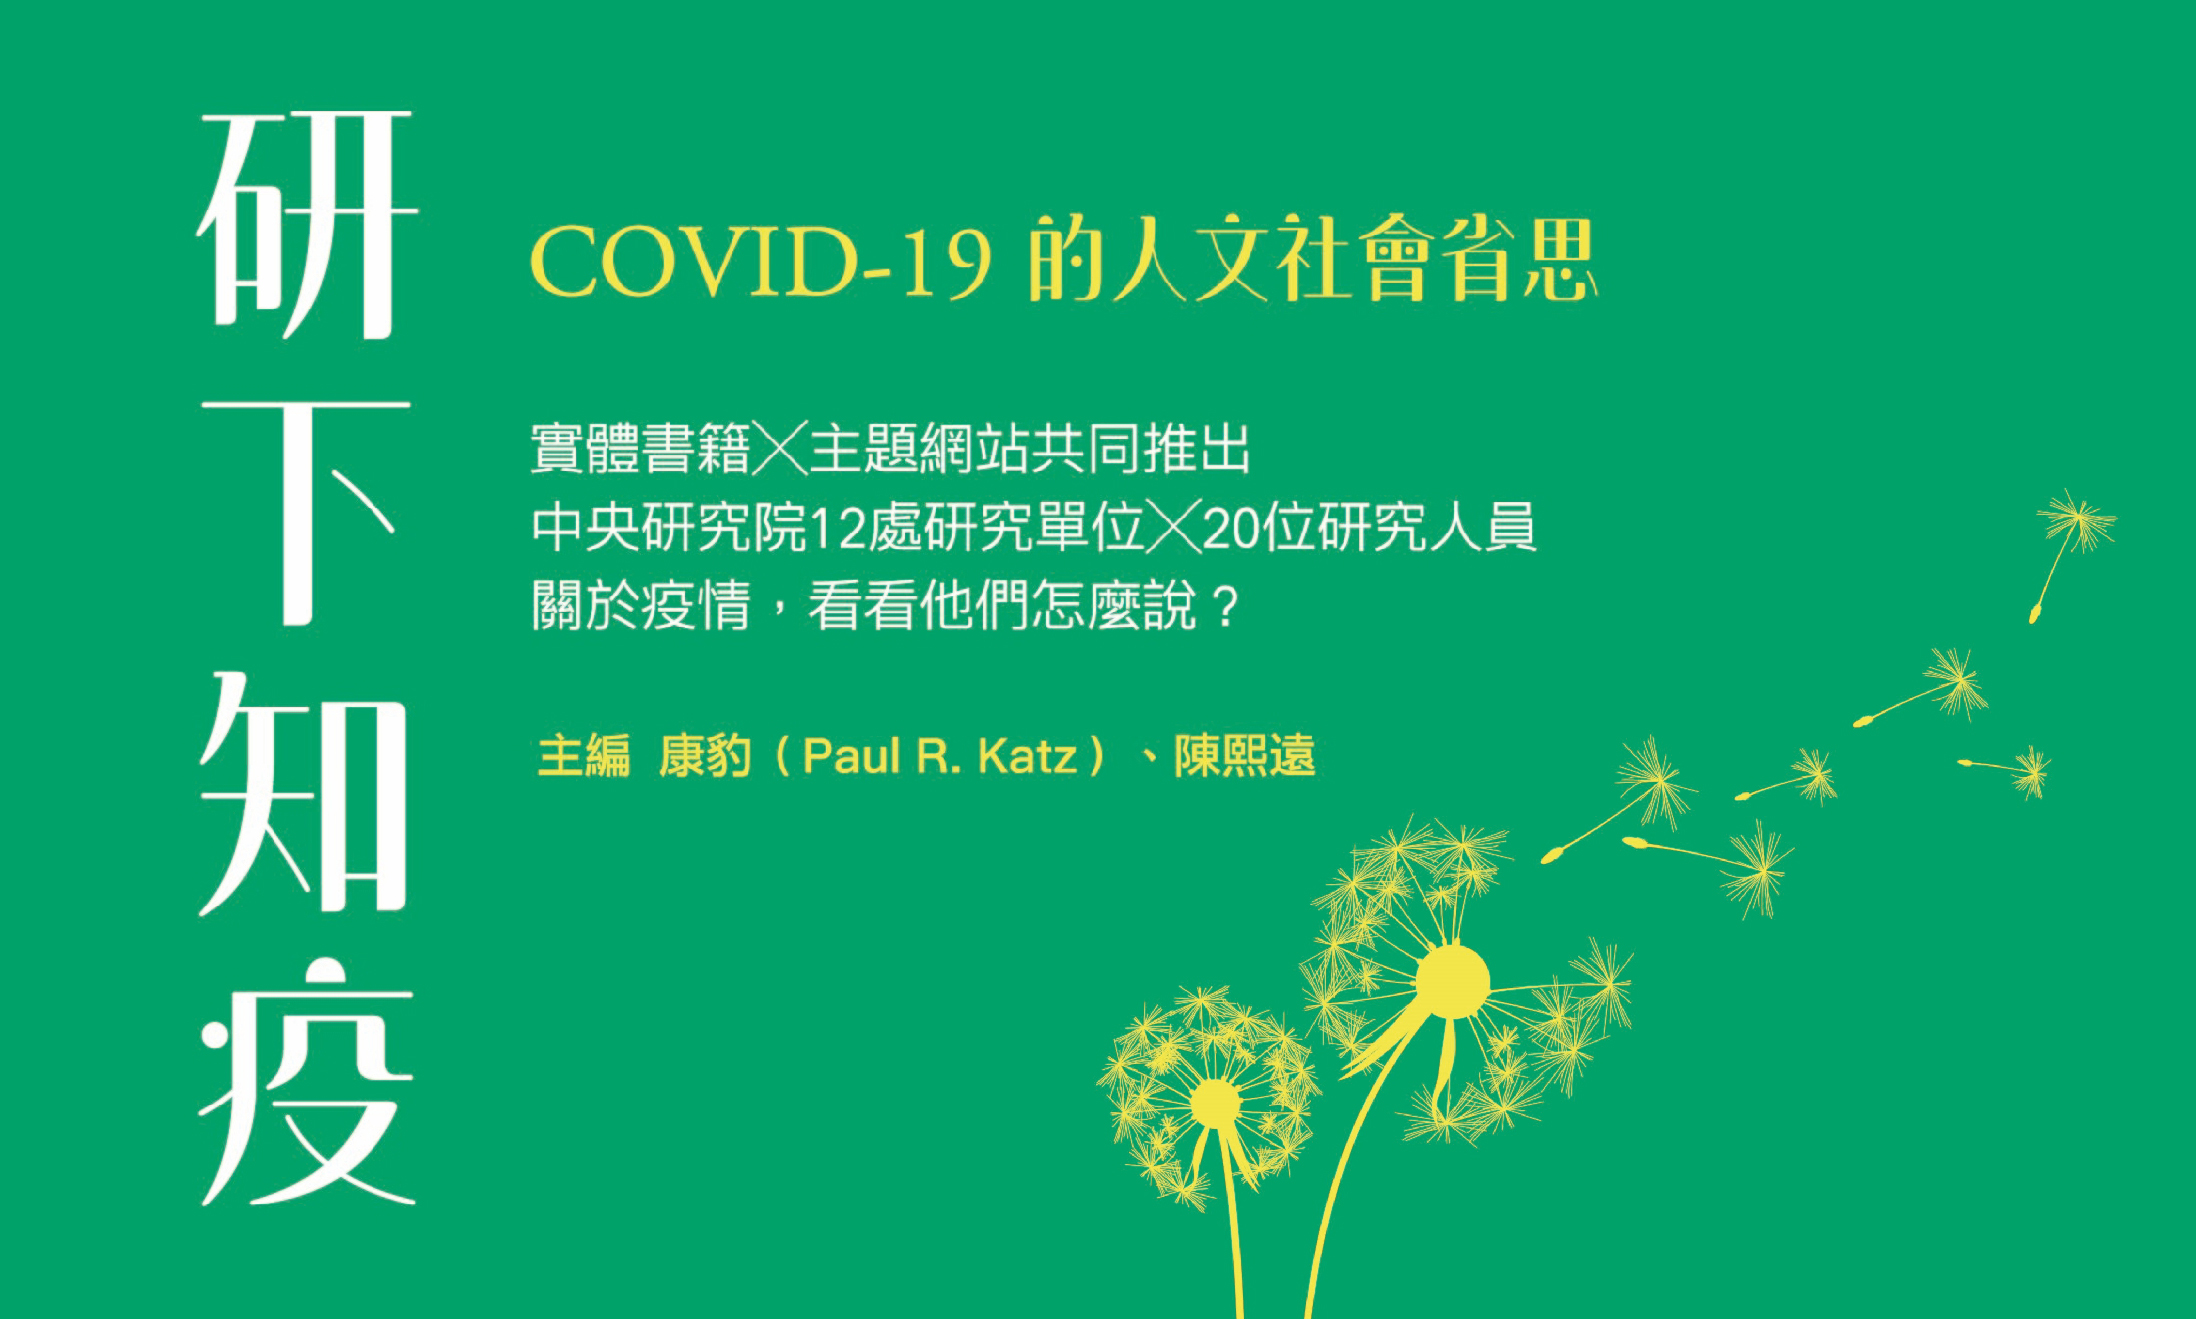 Learning from the Past and the Present! Academia Sinica Publishes Reflections on COVID-19, Showcasing Research on the Pandemic by 20 Humanities and Social Science Scholars